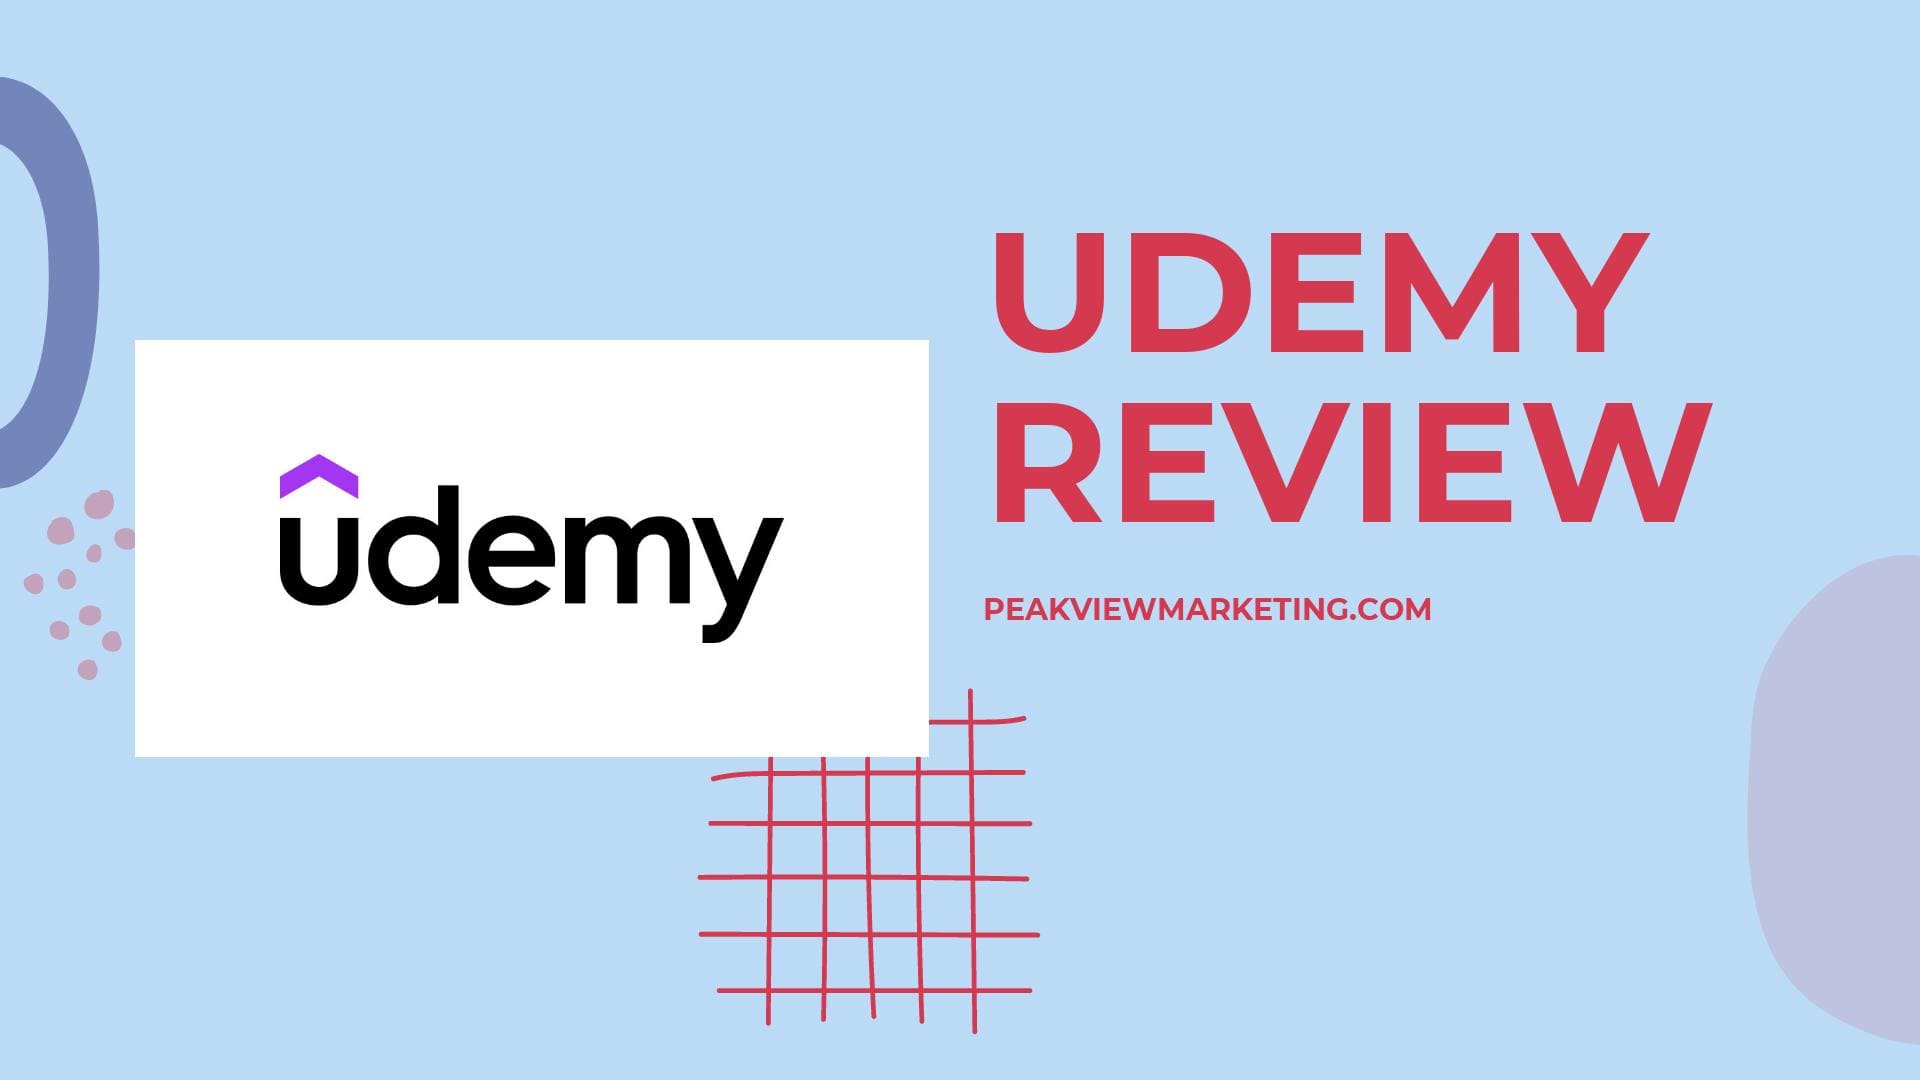 Udemy Review Image